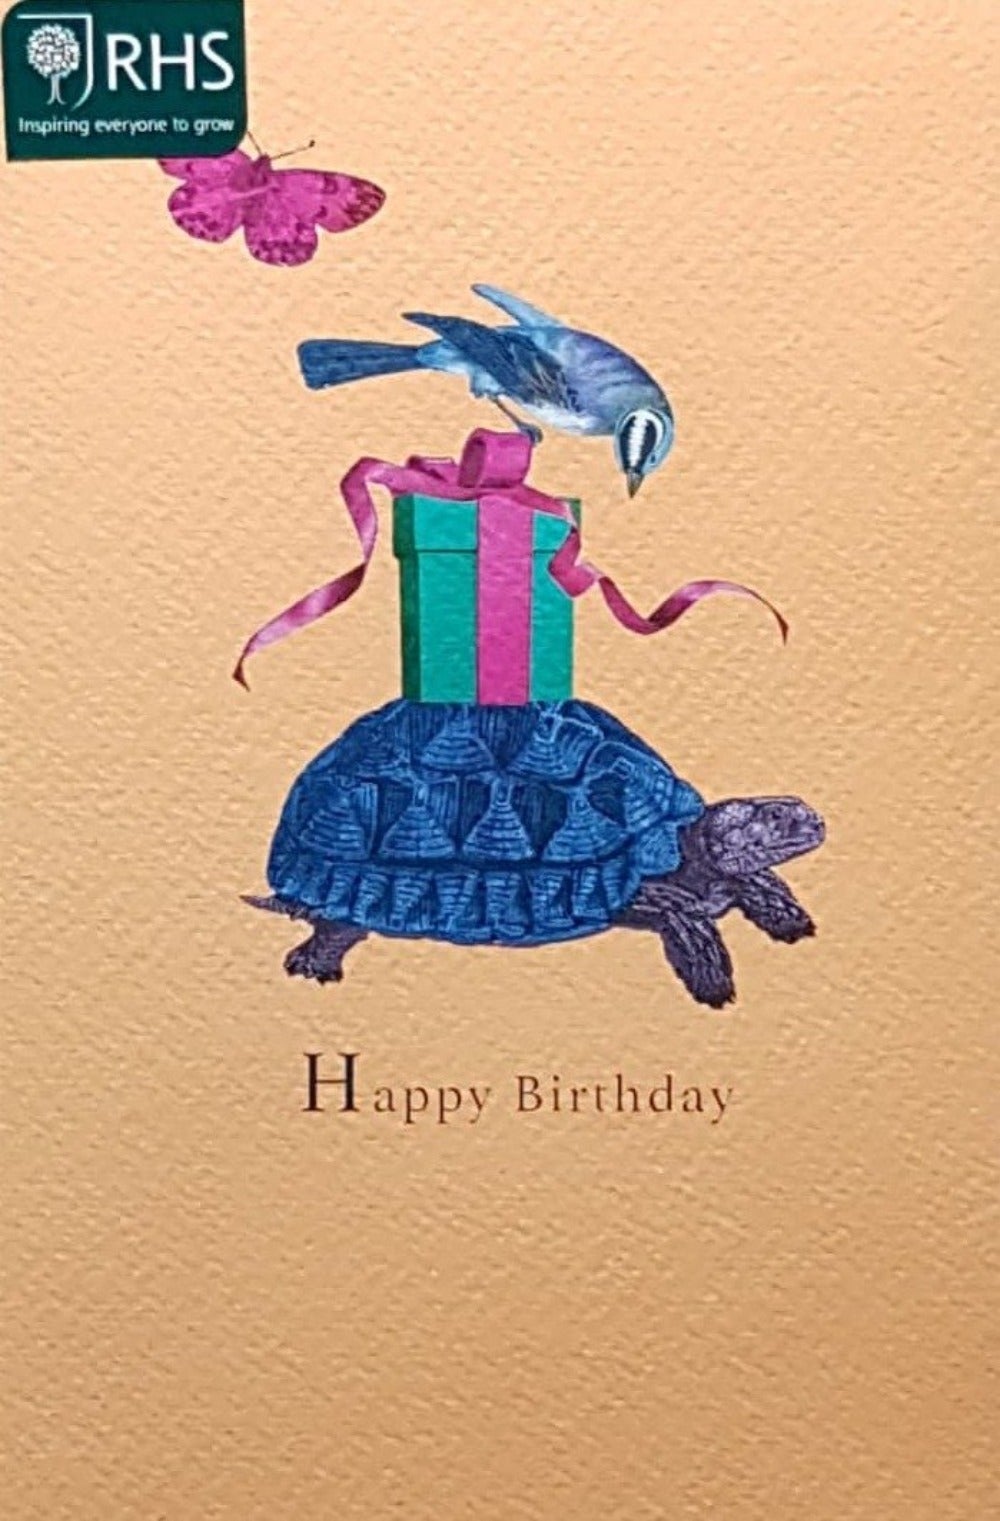 Birthday Card - A Bird On Gift Box Looking Down To A Tortoise